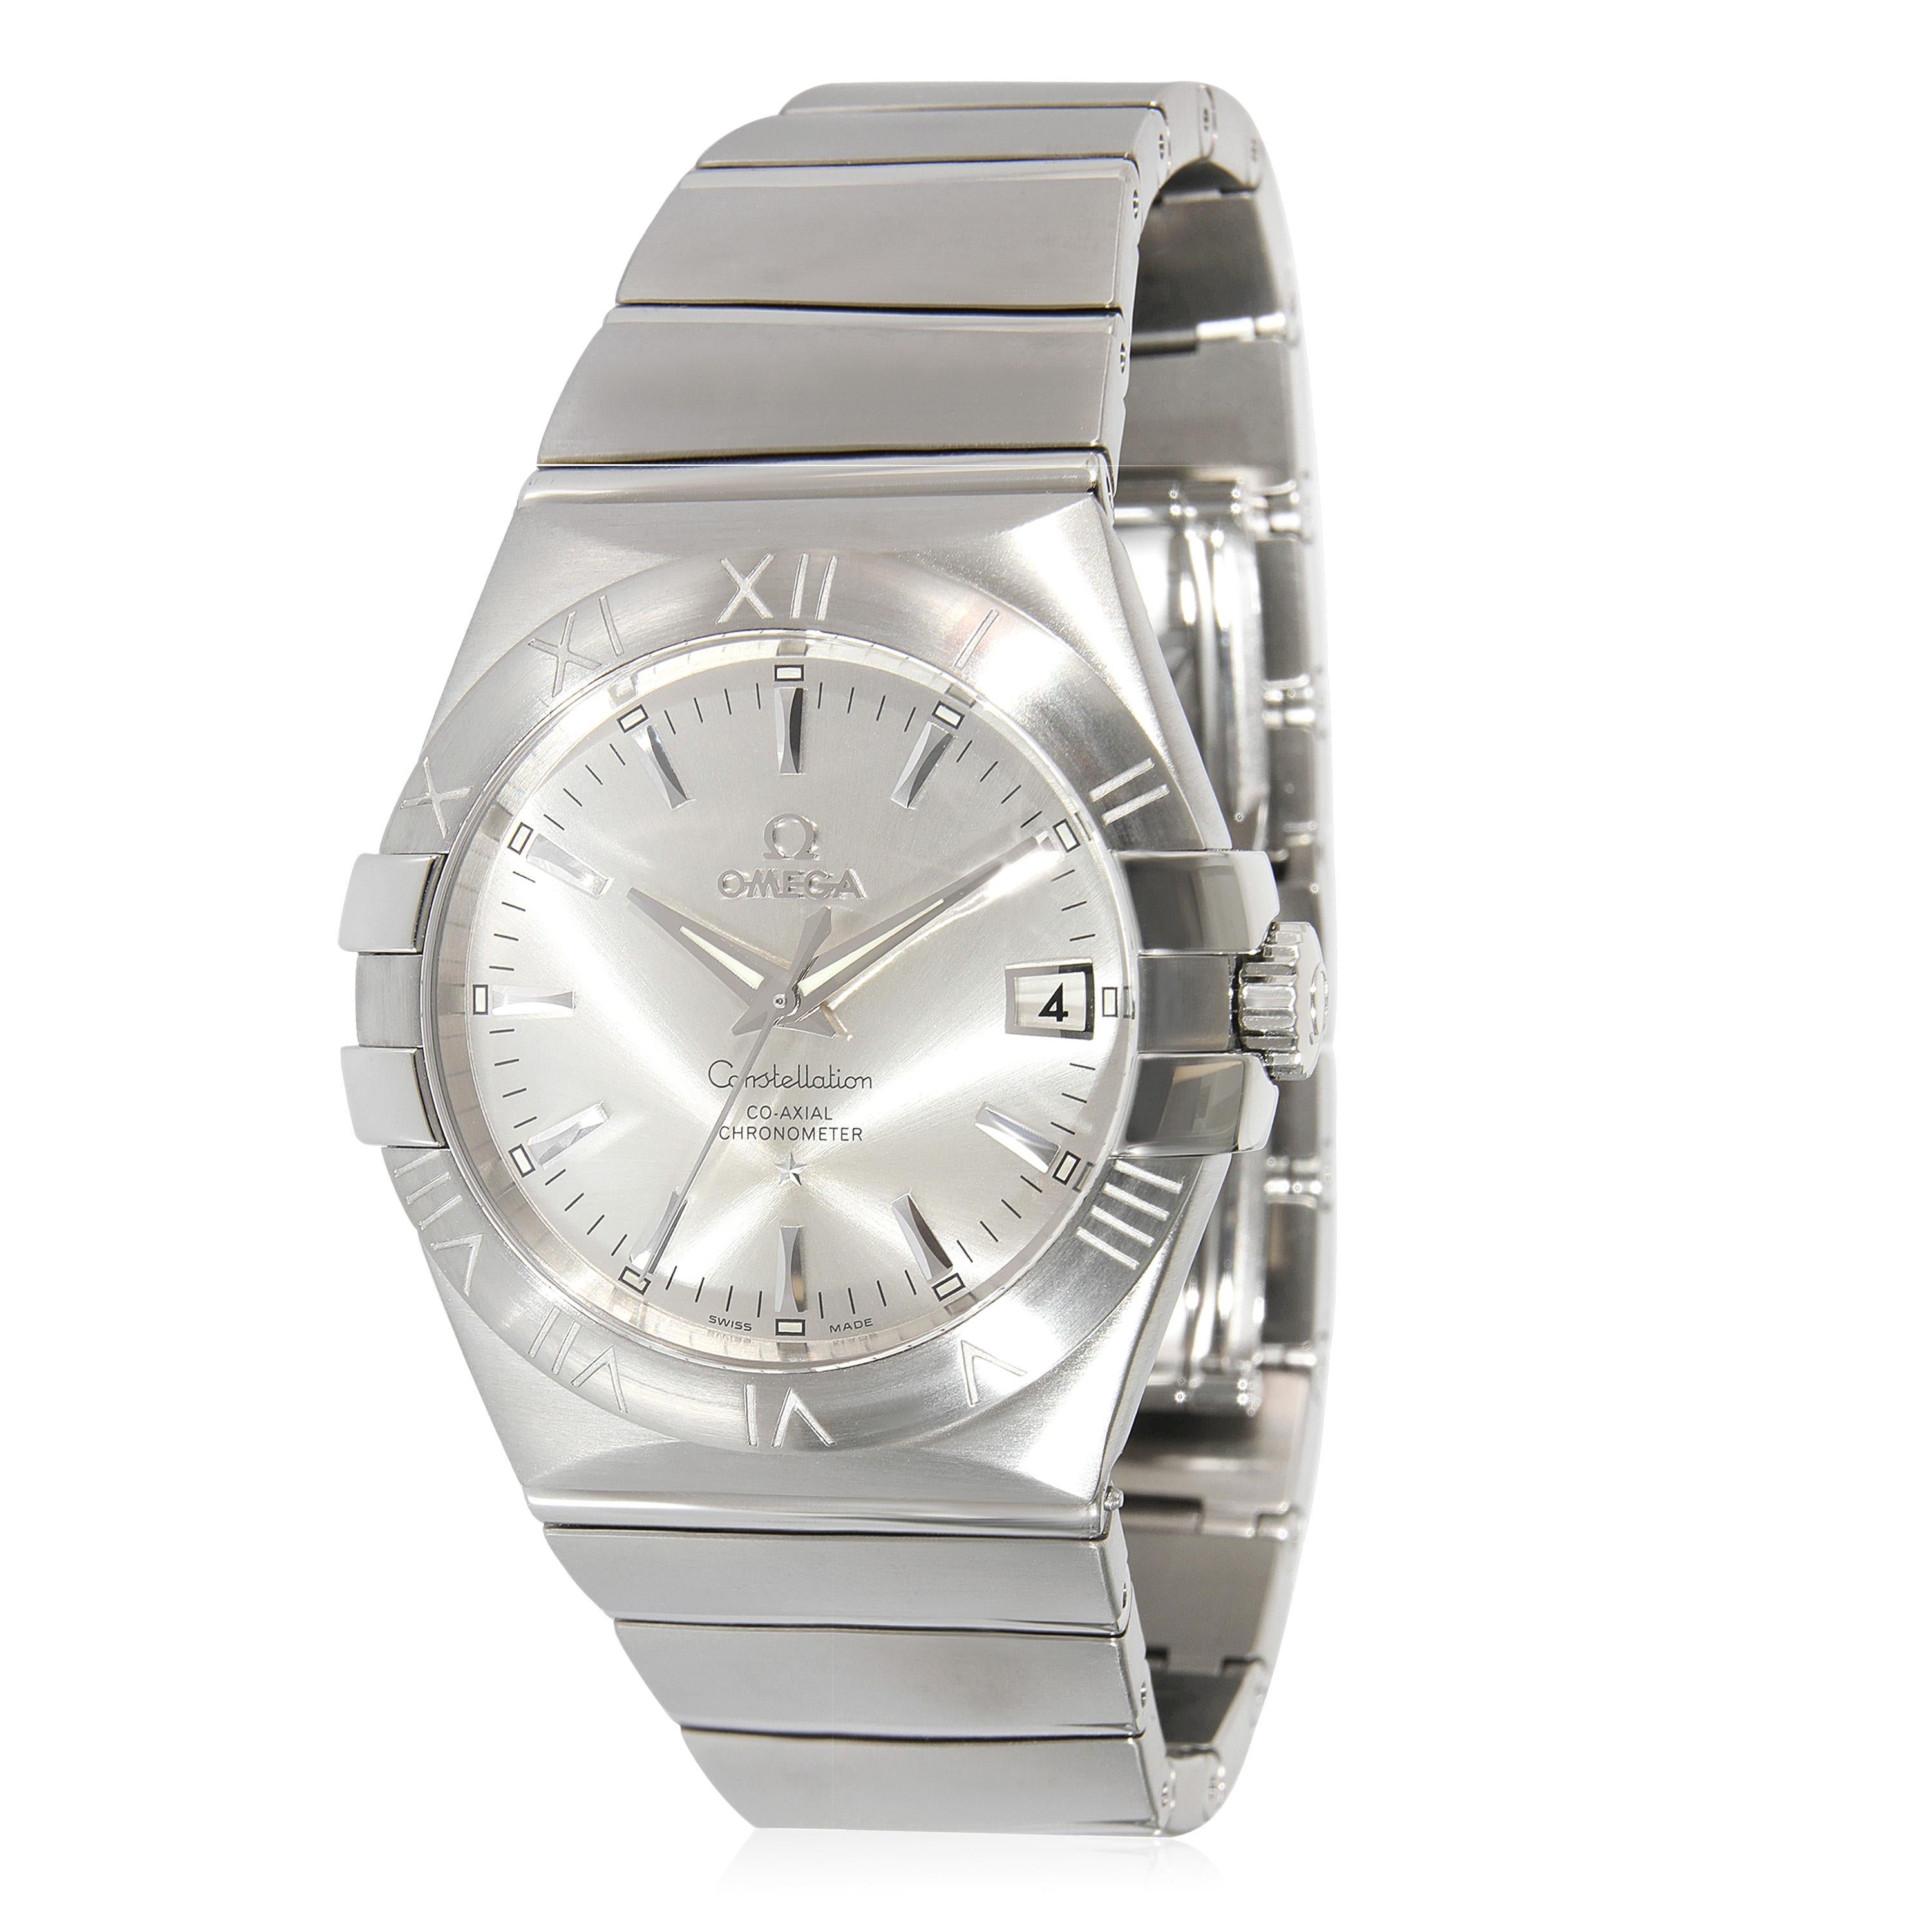 Omega Constellation 123.10.35.20.02.001 Unisex Watch in  Stainless Steel 2